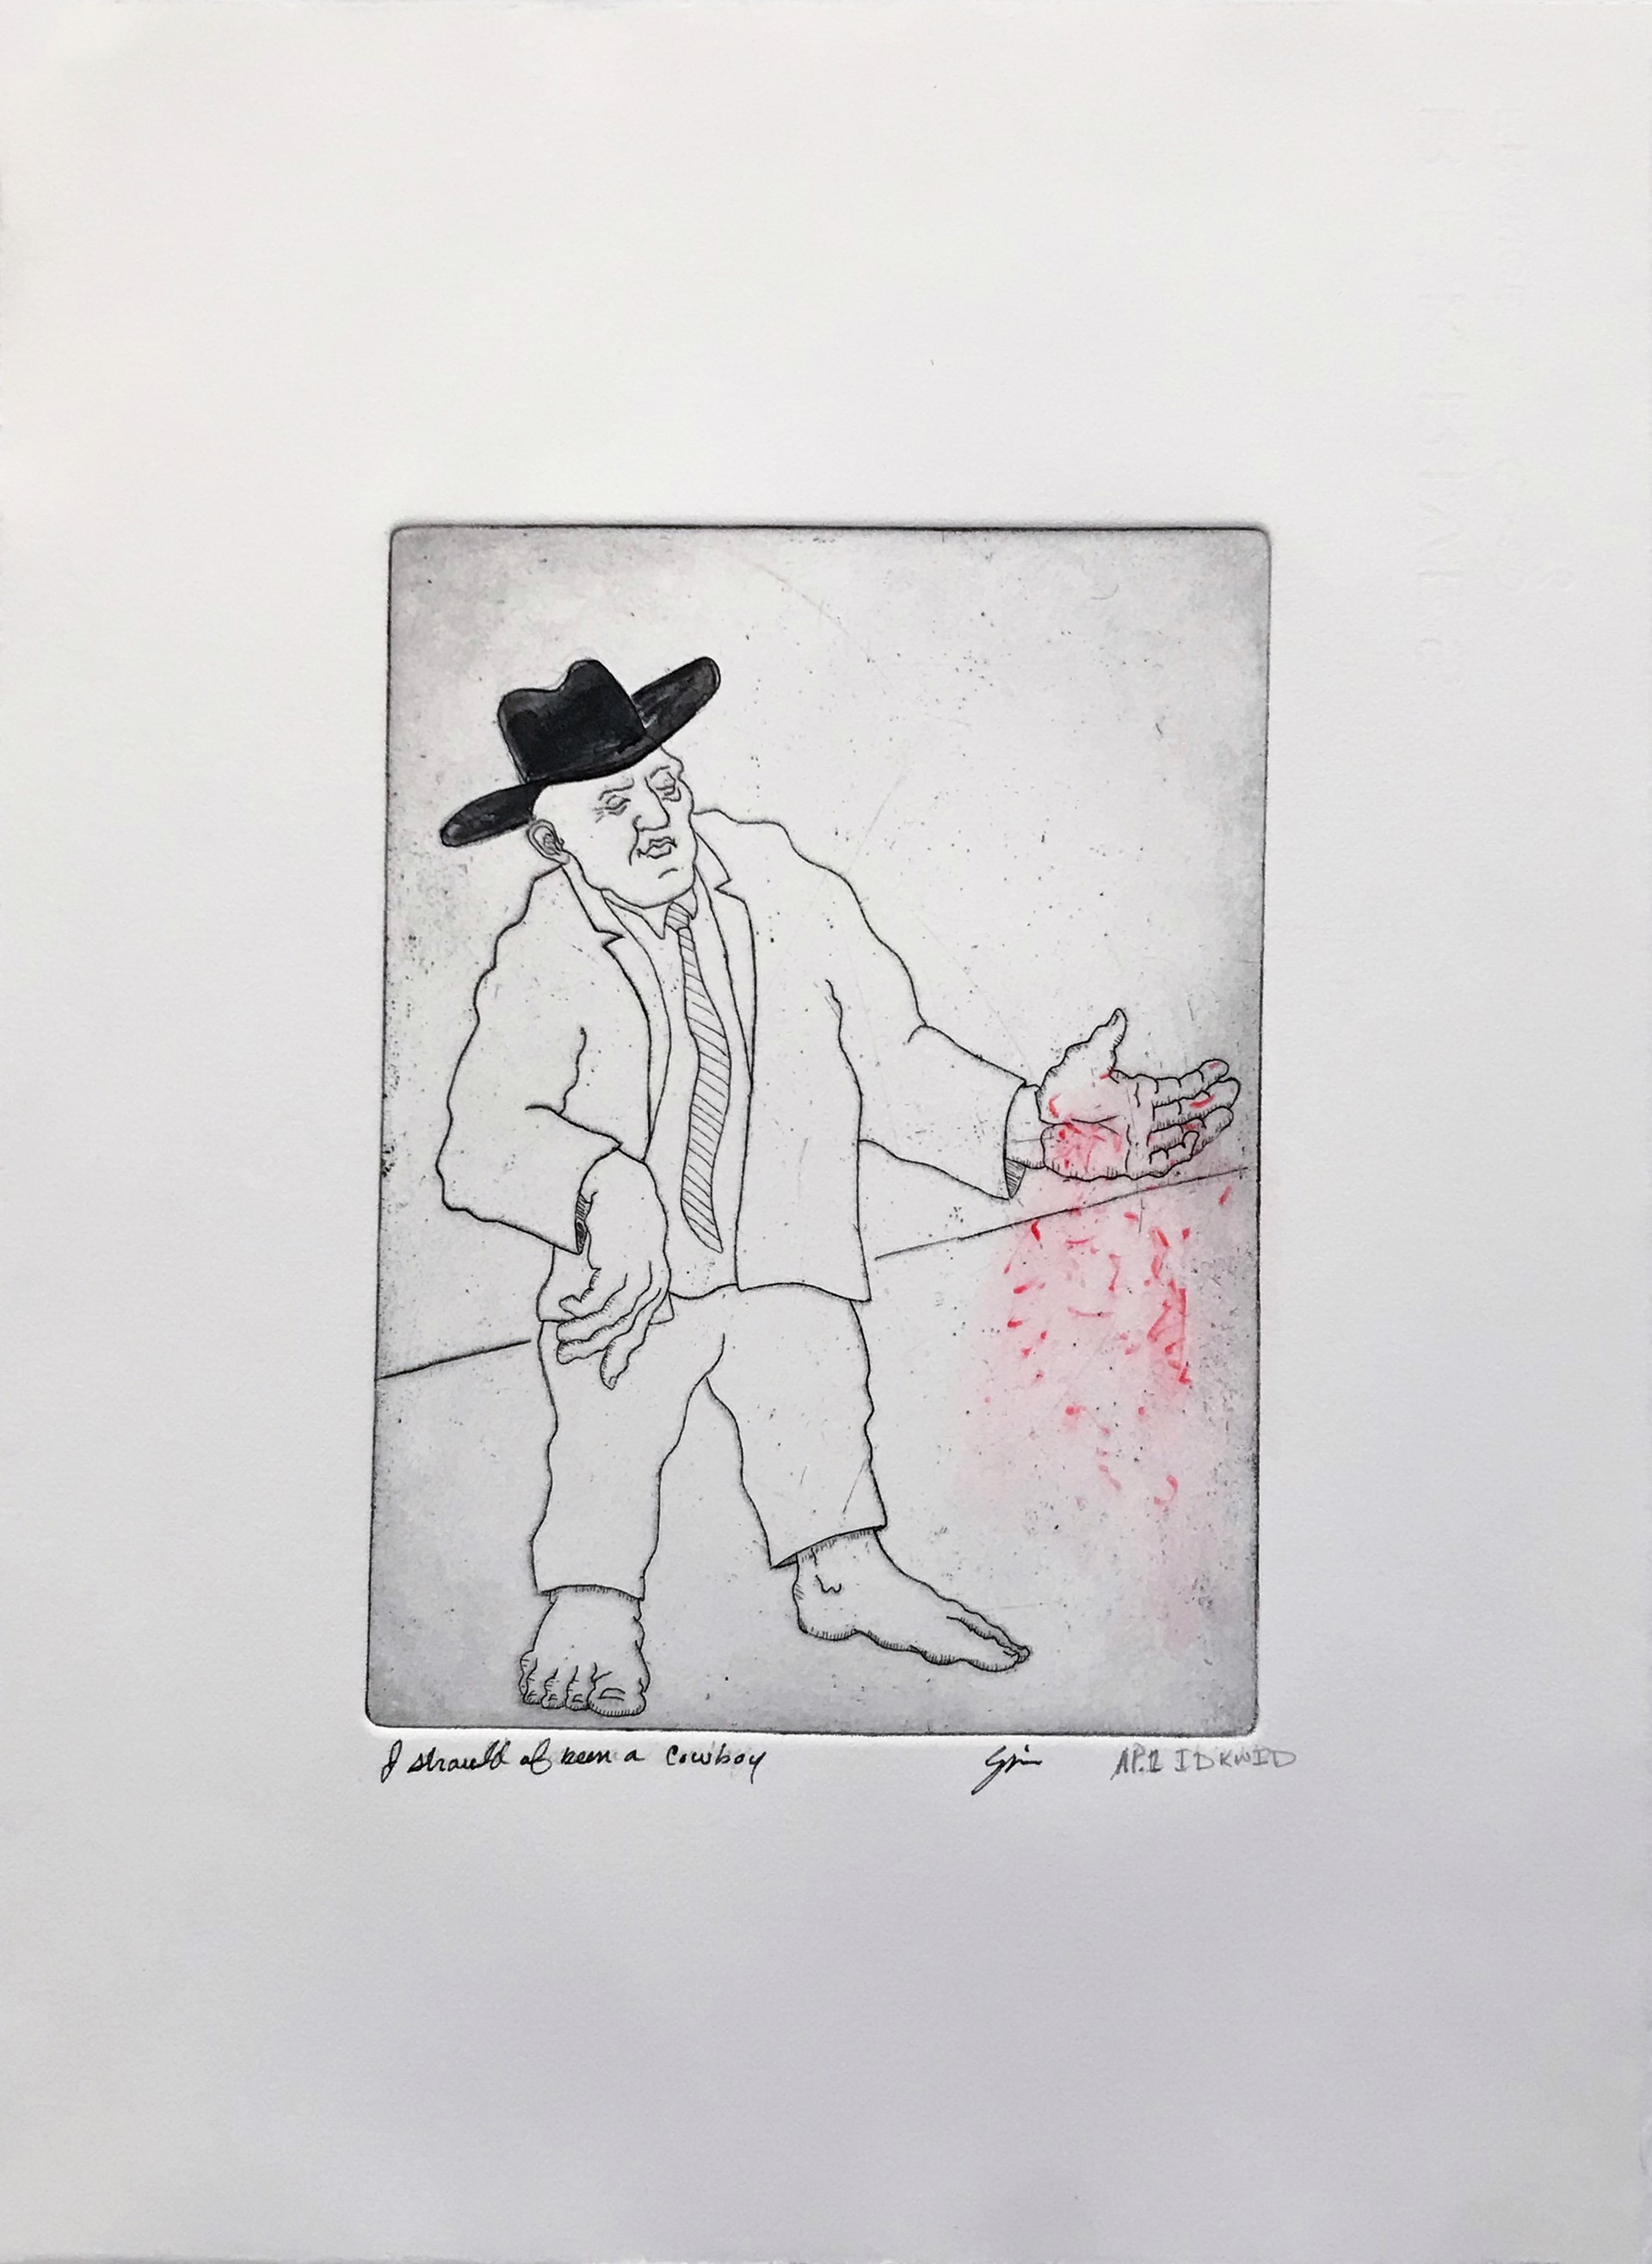 Untitled (I Should of Been a Cowboy) AP 1 by Martin Spei